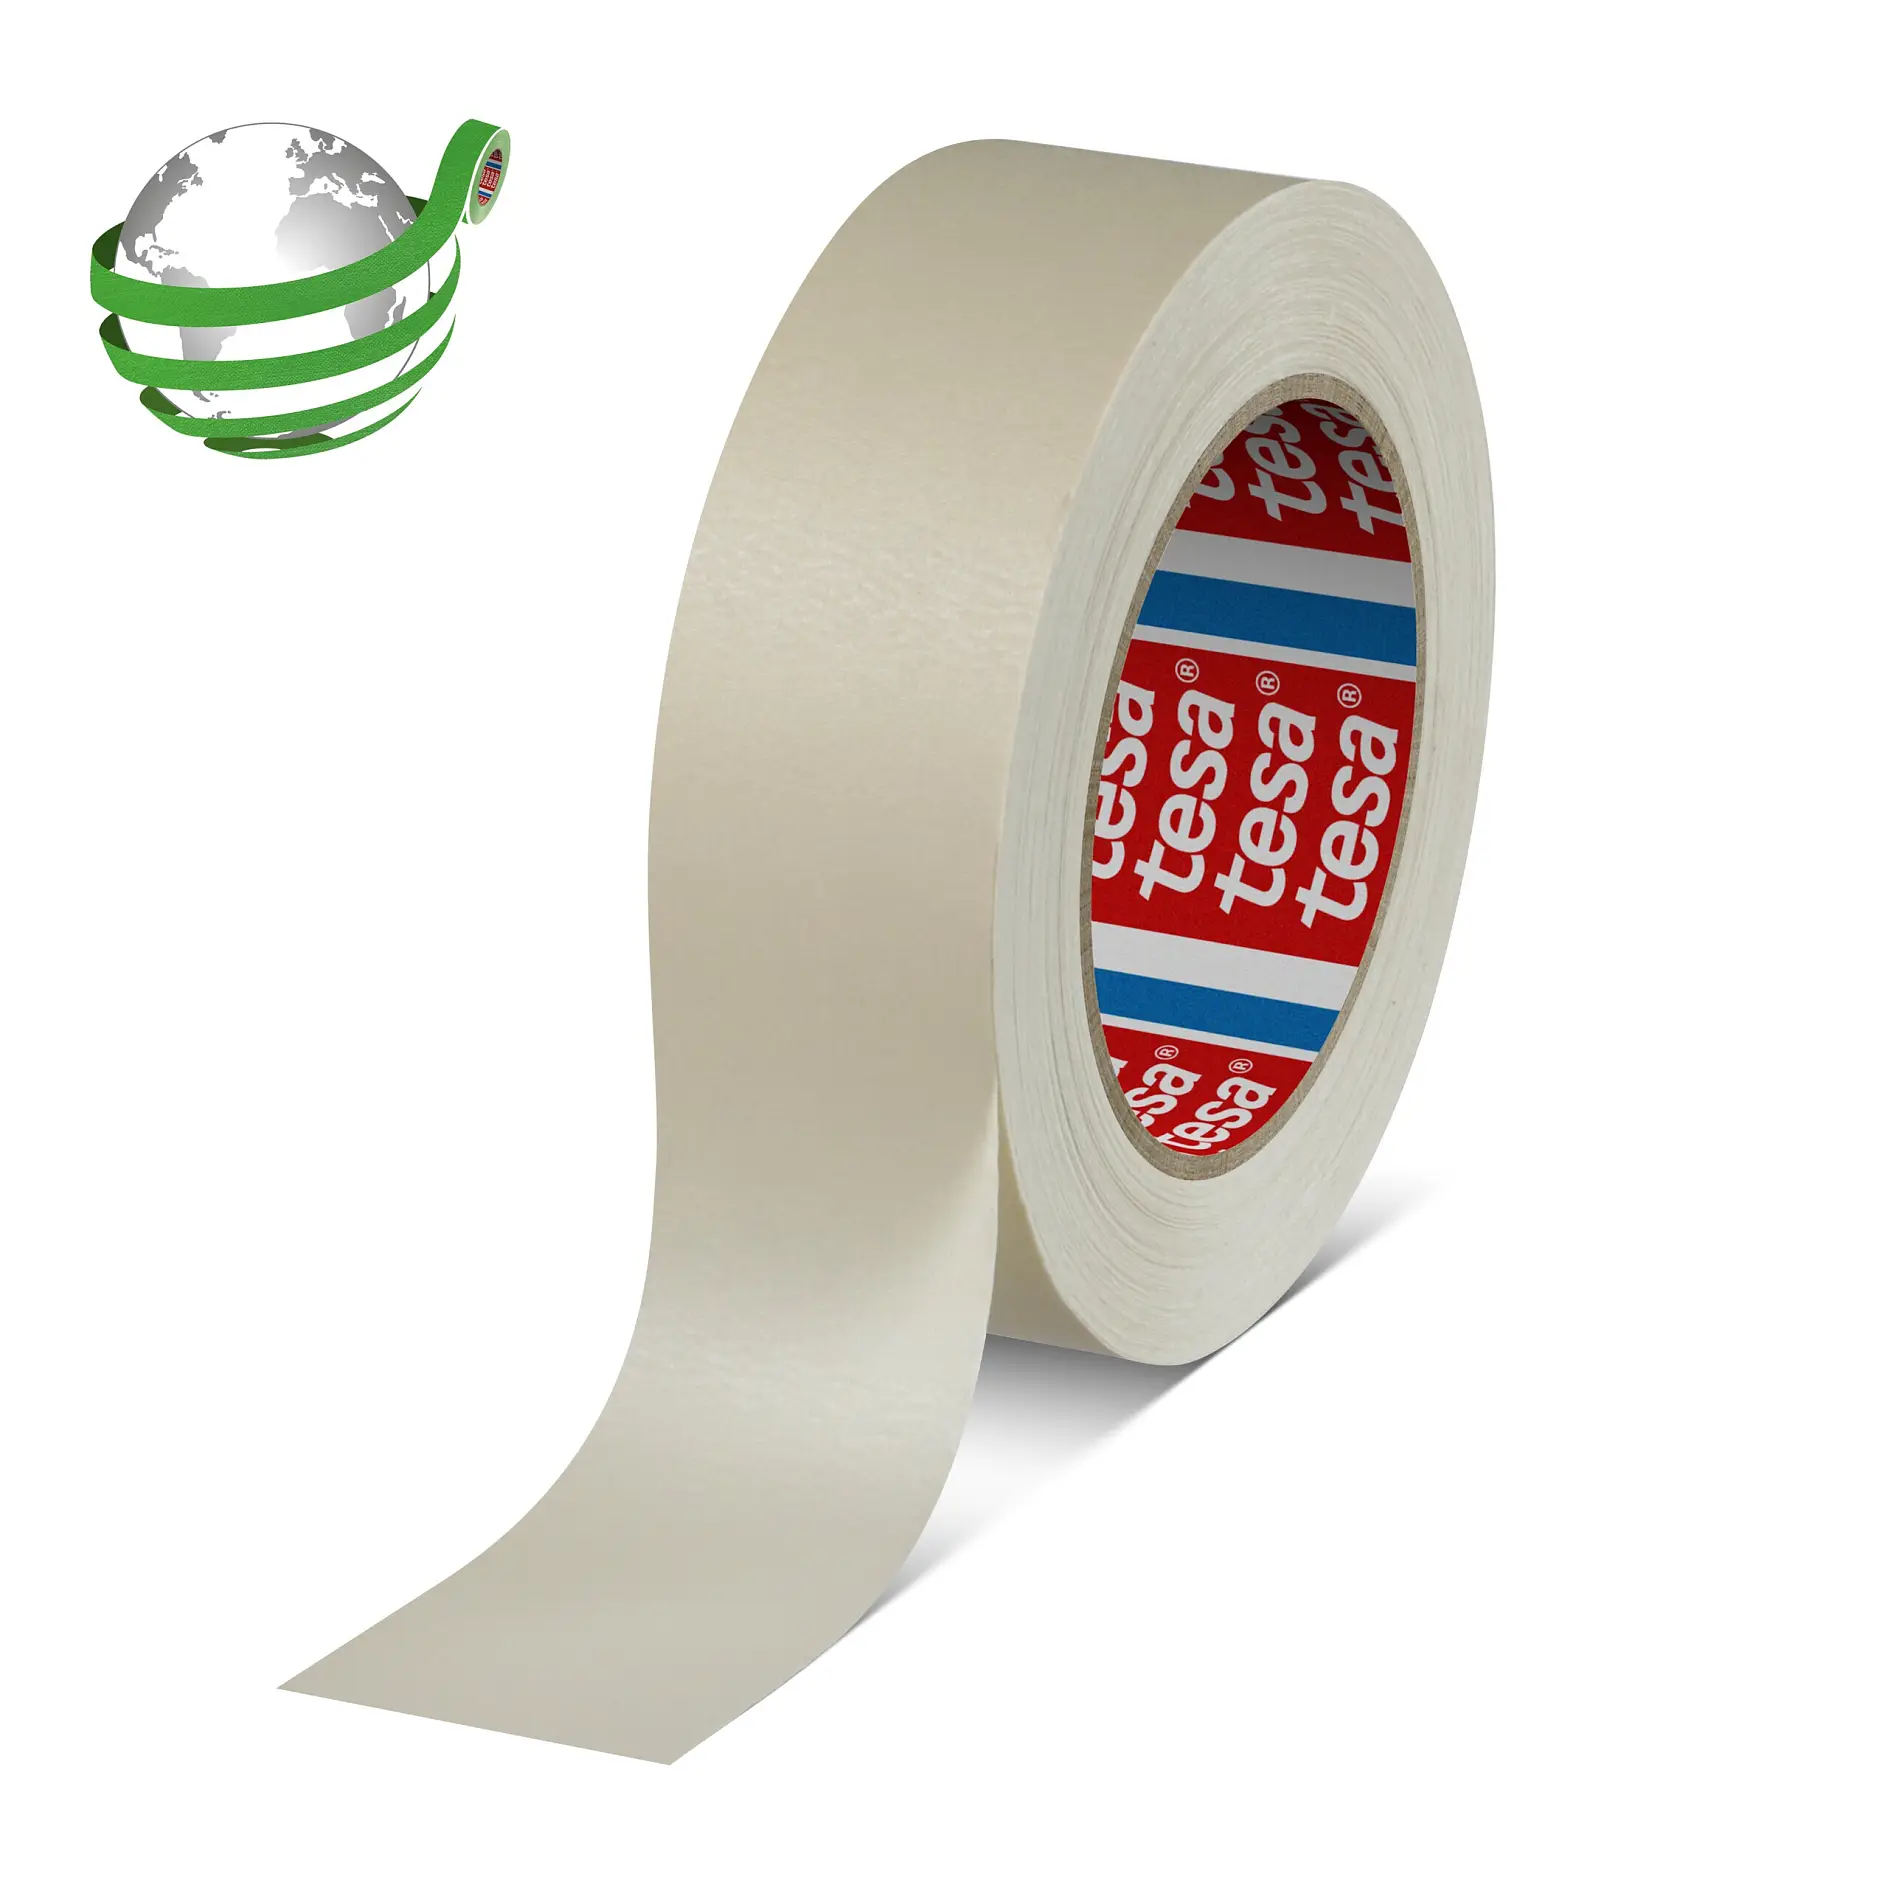 tesa-4316-pv3-creped-paper-masking-tape-spray-paint-chamois-043160001303-pr-with-marker